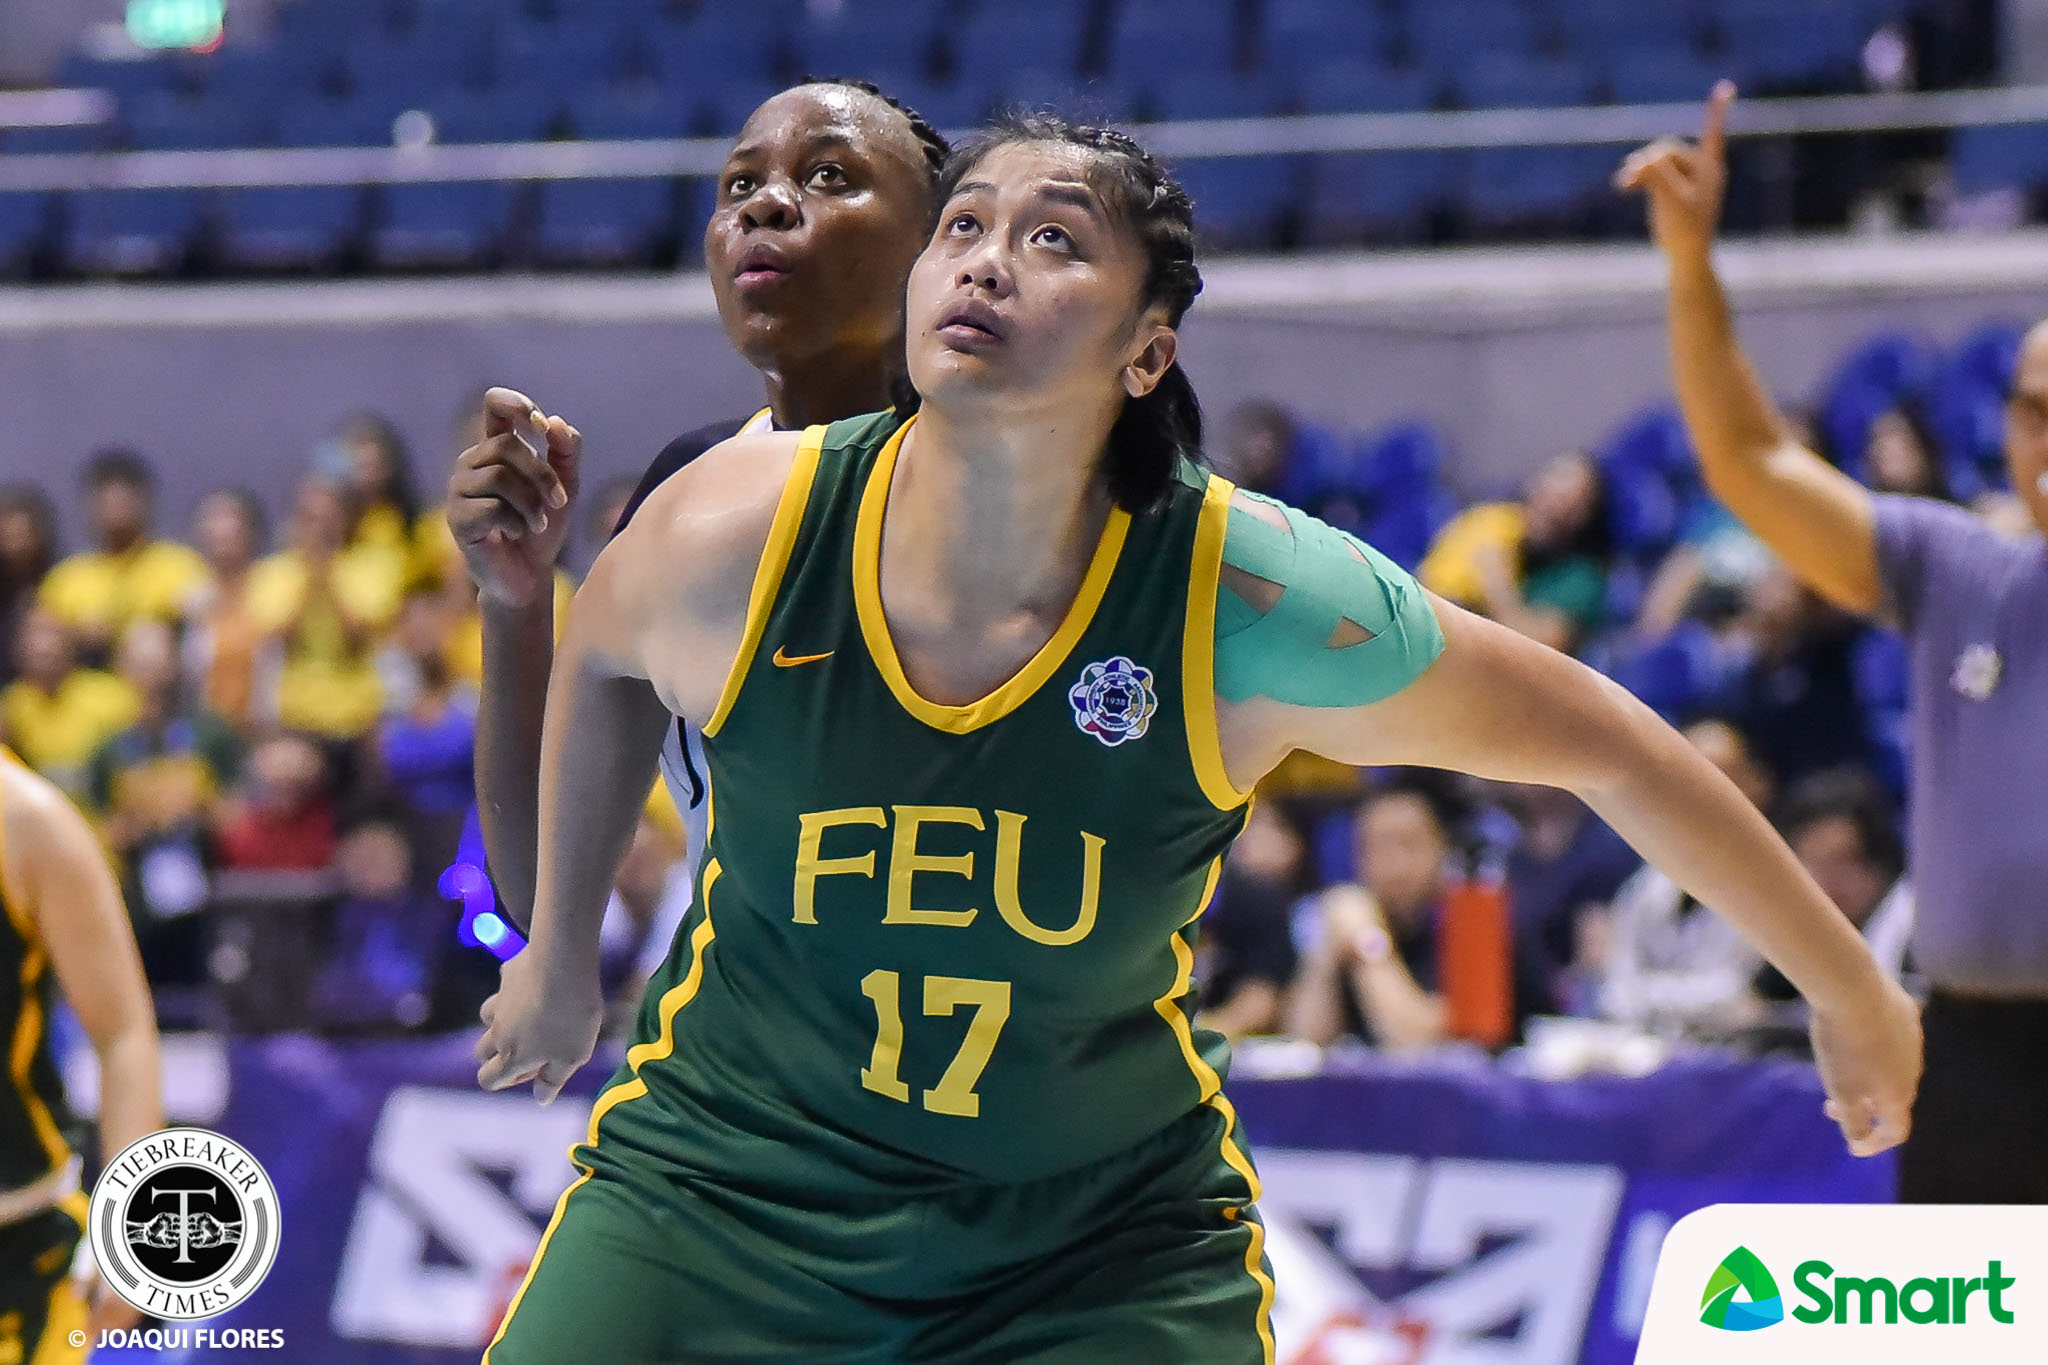 UAAP-82-WBB-UST-vs.-FEU-Castro-2772 Despite somber exit, Clare Castro glad to have kept promise to FEU Basketball FEU News UAAP  - philippine sports news